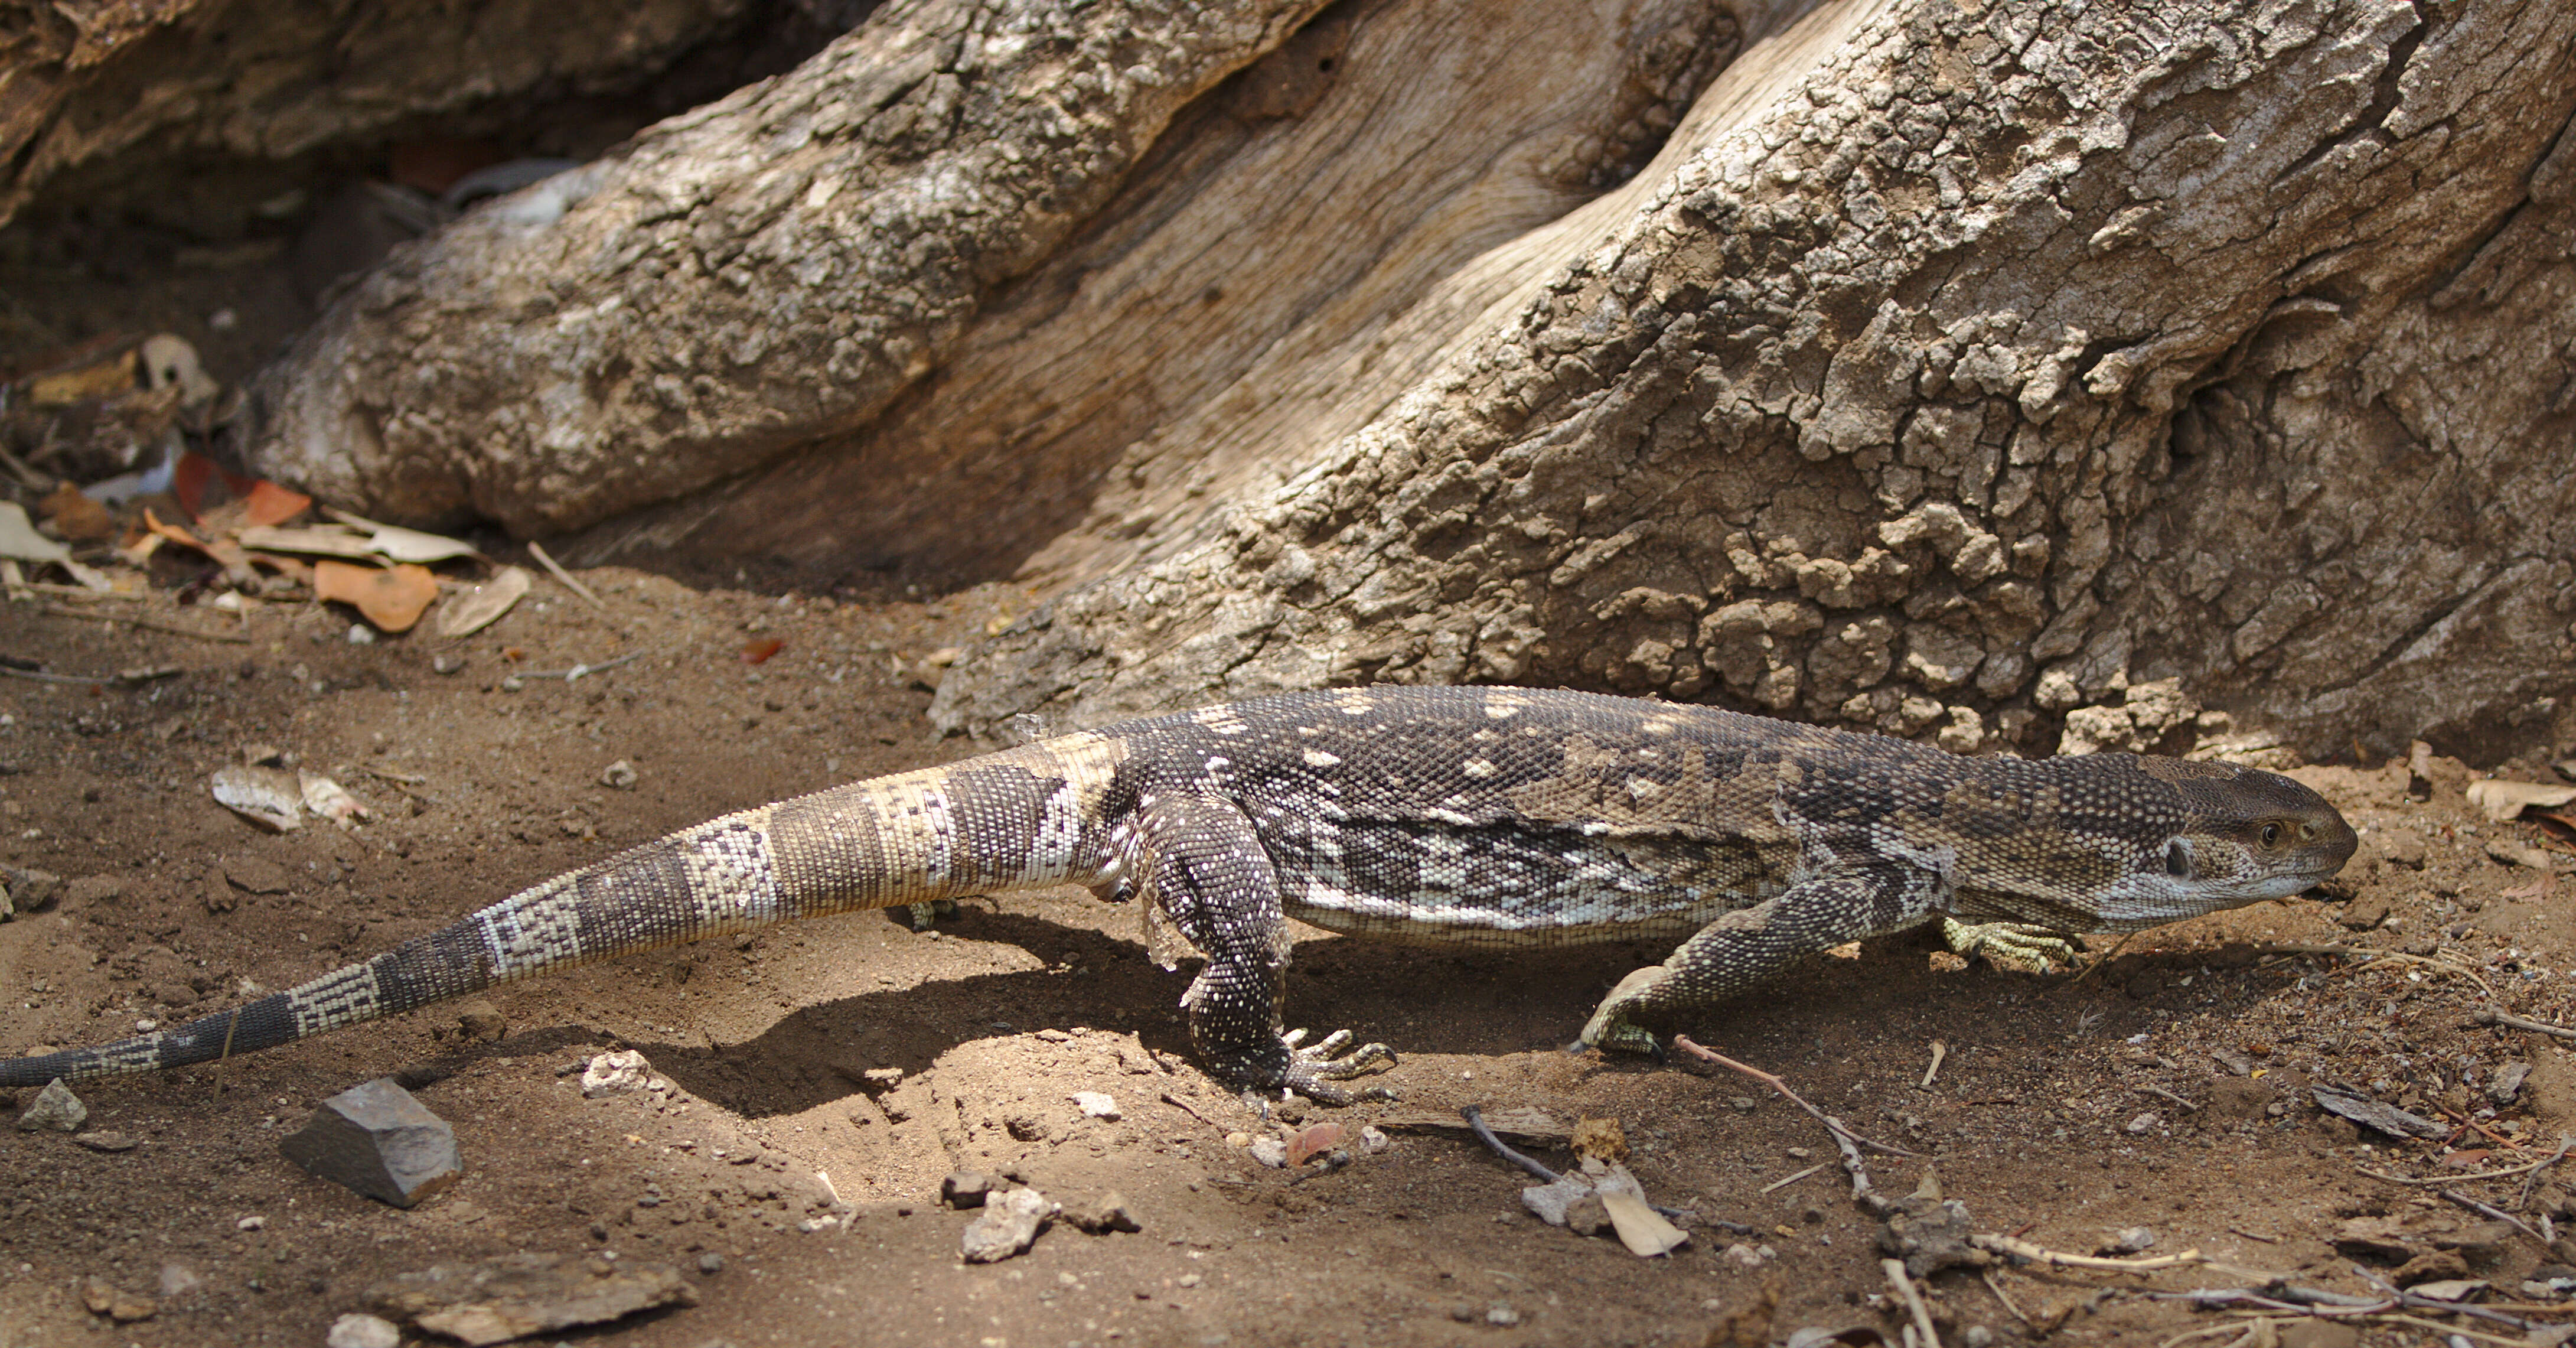 Image of White-throated monitor